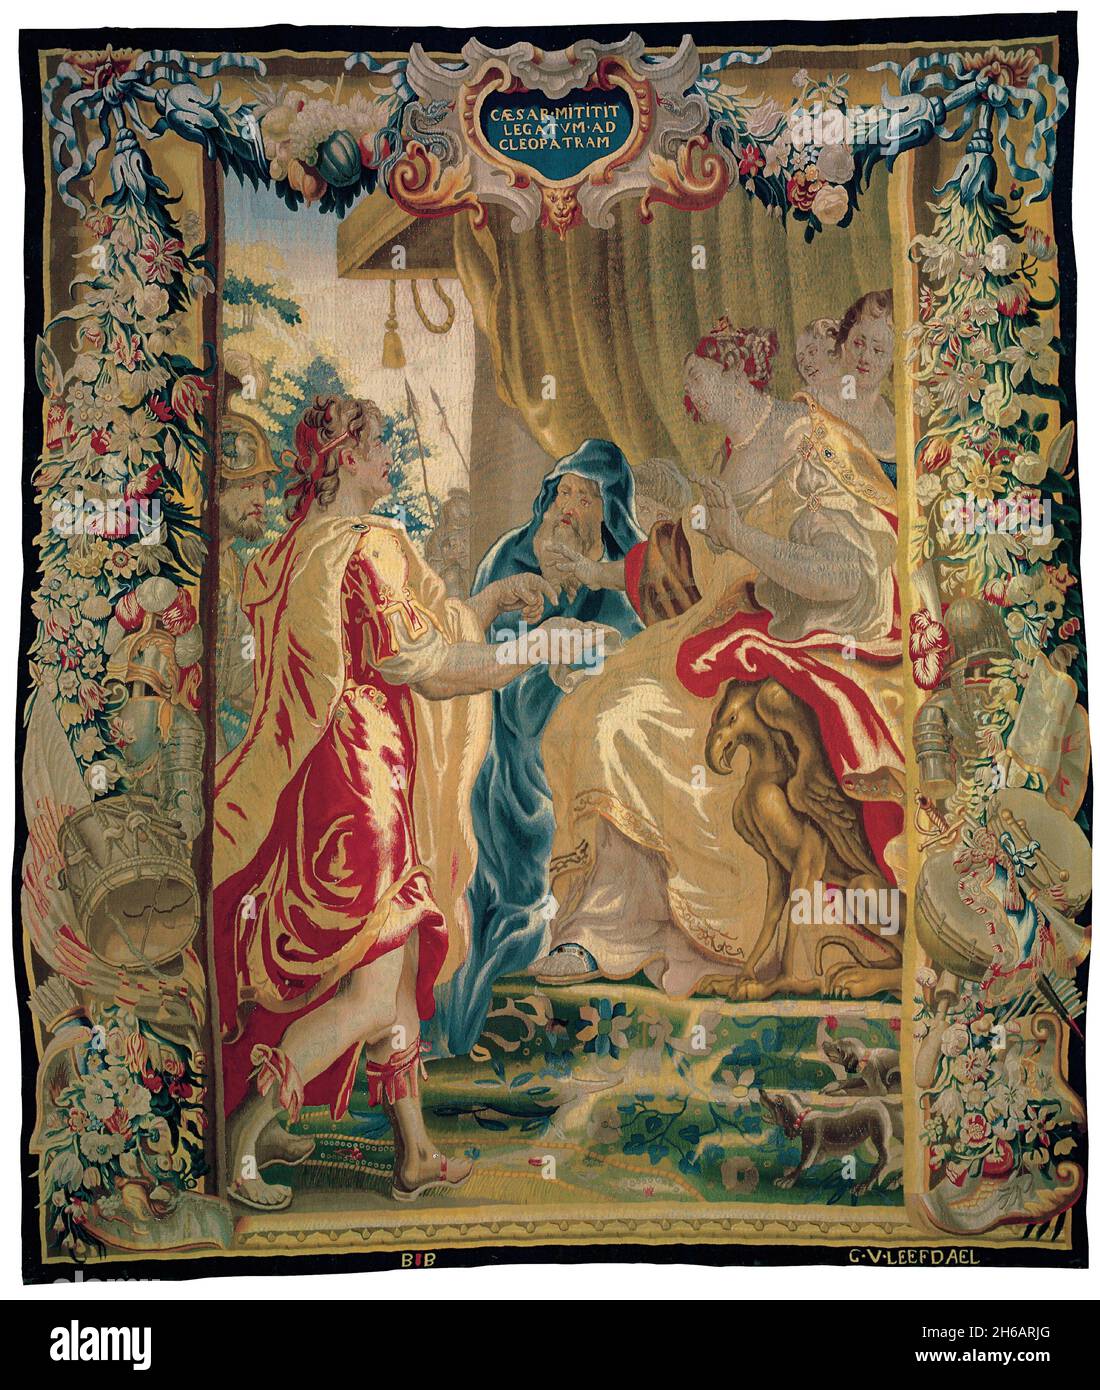 Caesar Sends a Messenger to Cleopatra, from 'The Story of Caesar and Cleopatra', Flanders, c. 1680. Woven at the workshop of Willem van Leefdael, after a design by Justus van Egmont. Stock Photo